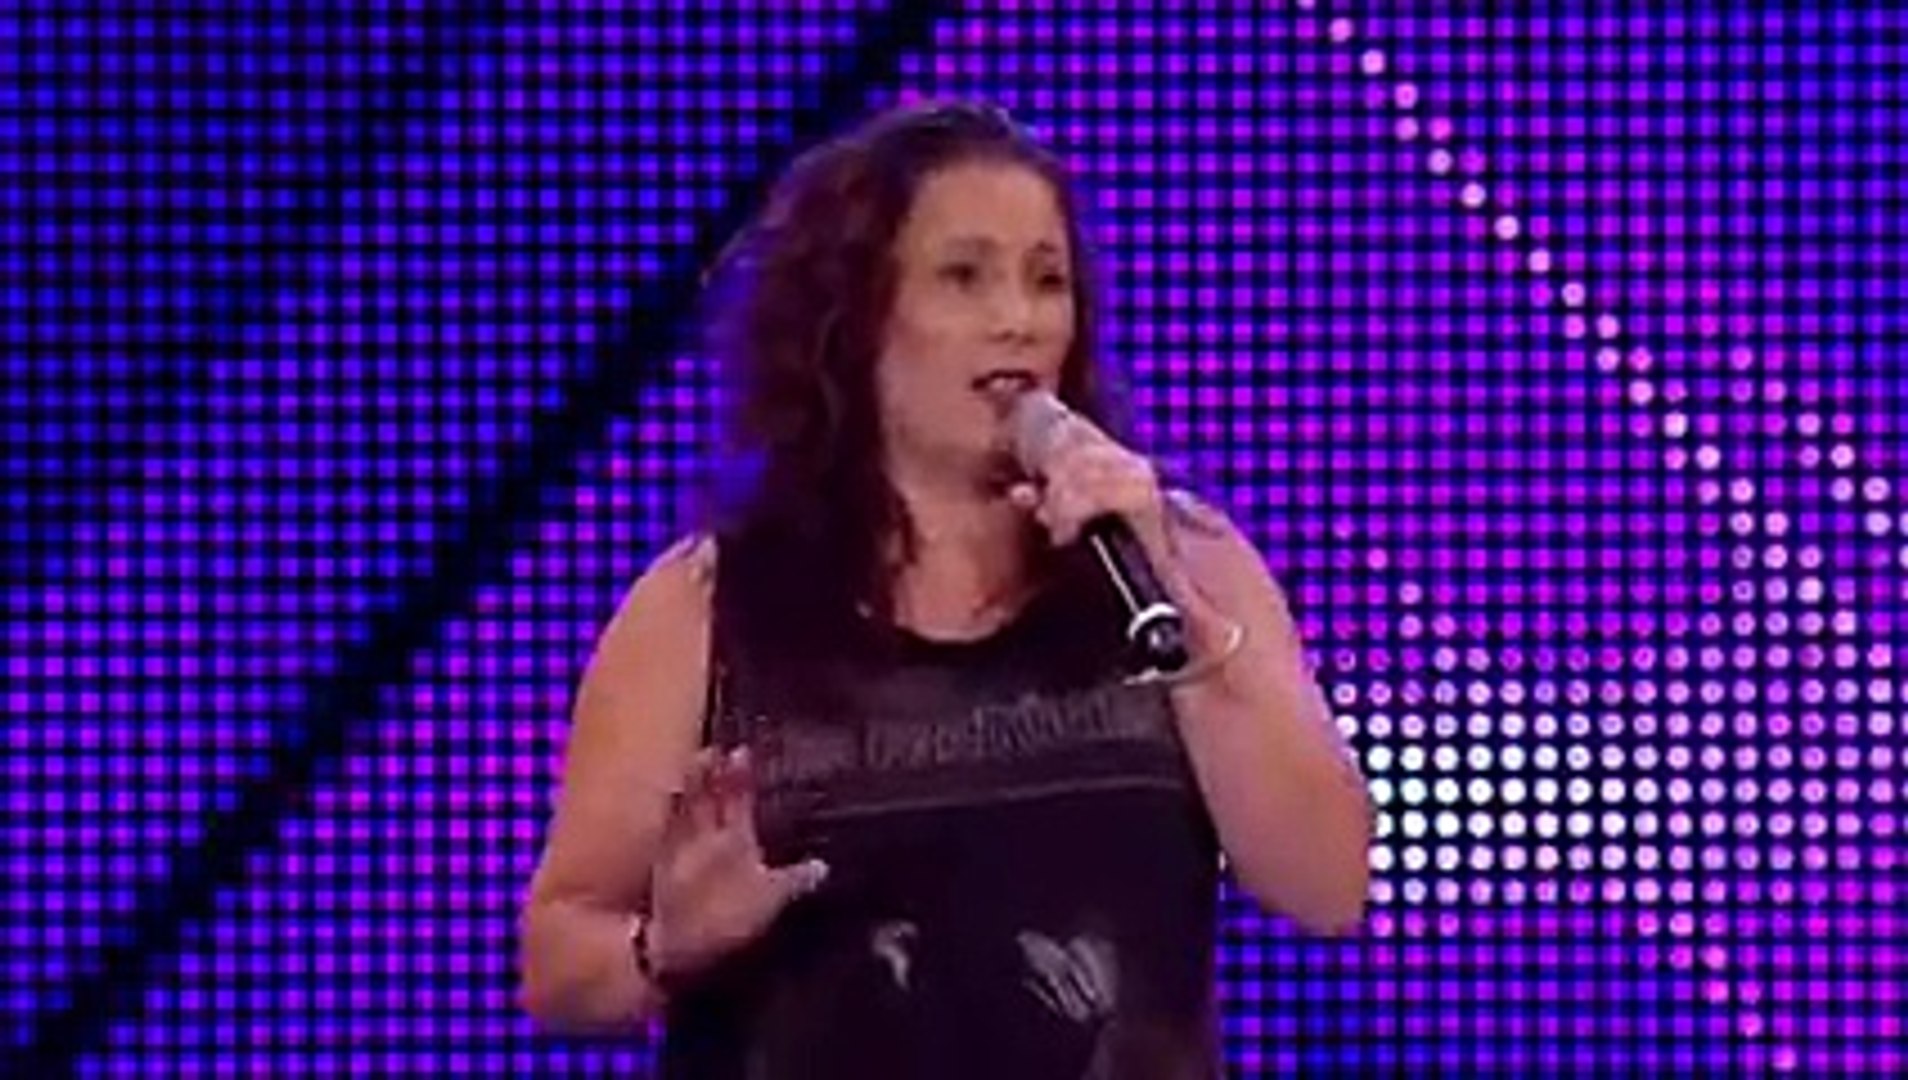 Sam Bailey sings Clown by Emeli Sande -- Bootcamp Auditions -- The X Factor 2013 -Official Channel